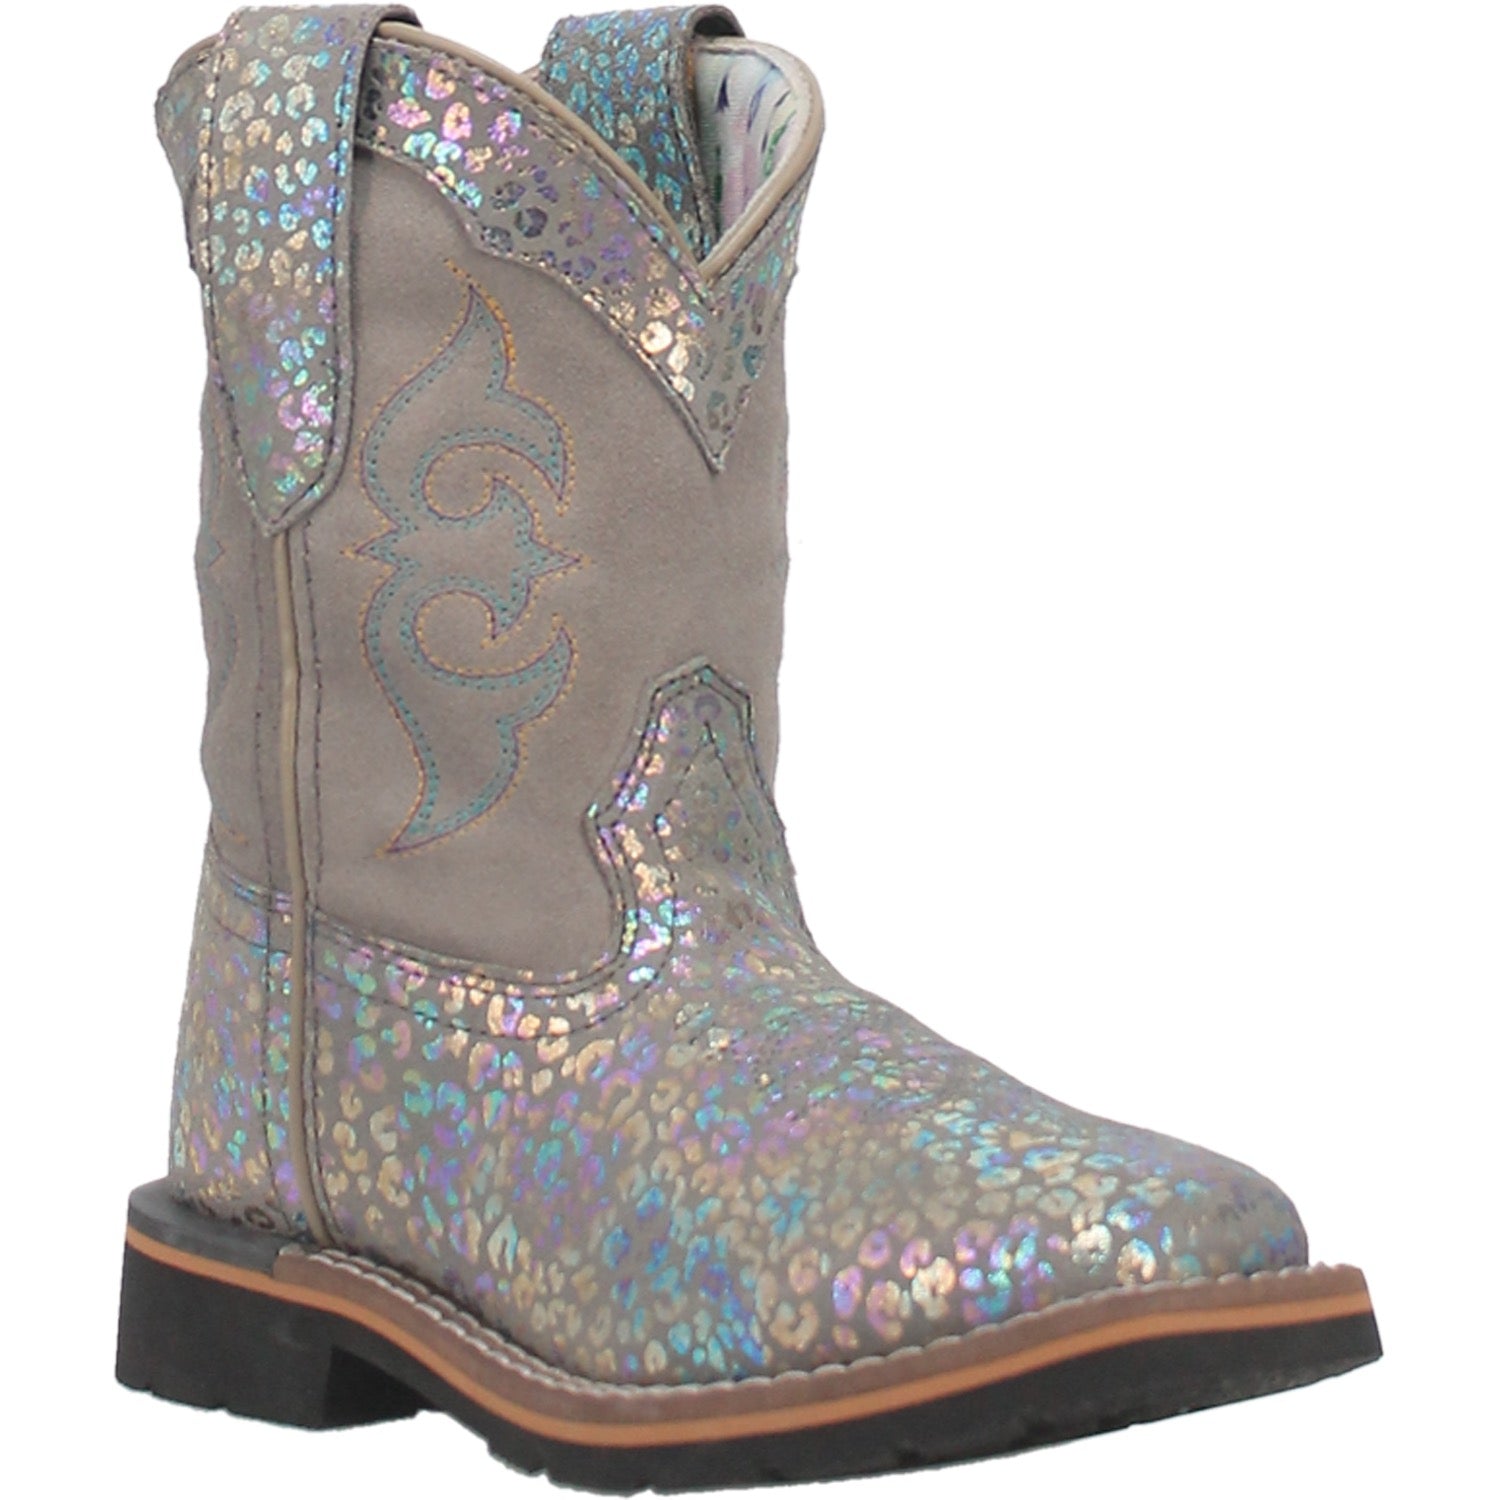 SHIVA LEATHER YOUTH BOOT Cover